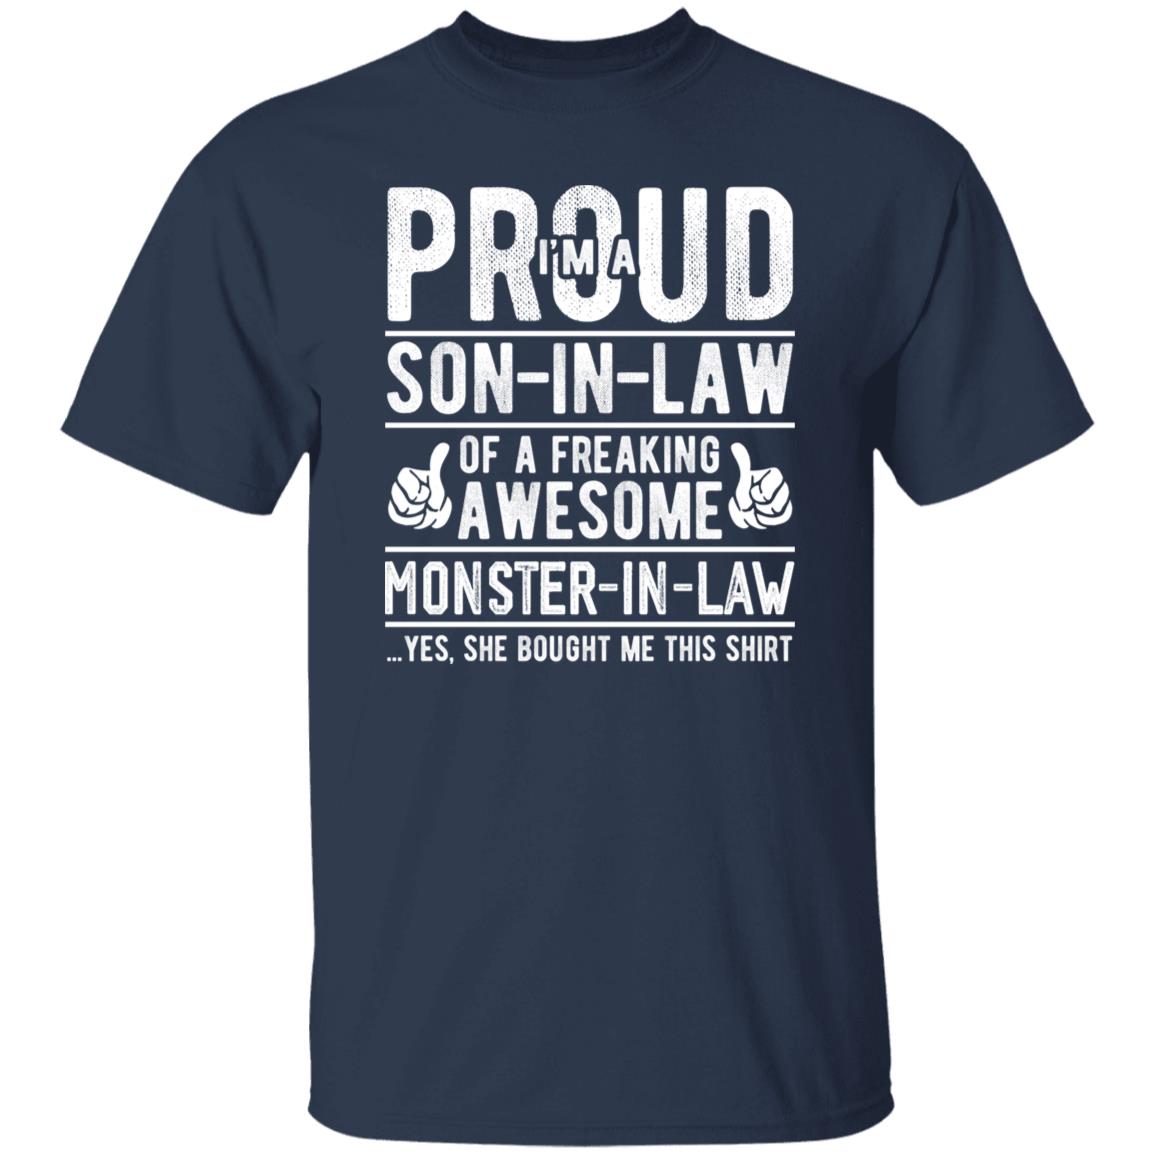 I'm a Proud Son-in-law Funny Tee Shirt From Monster in law